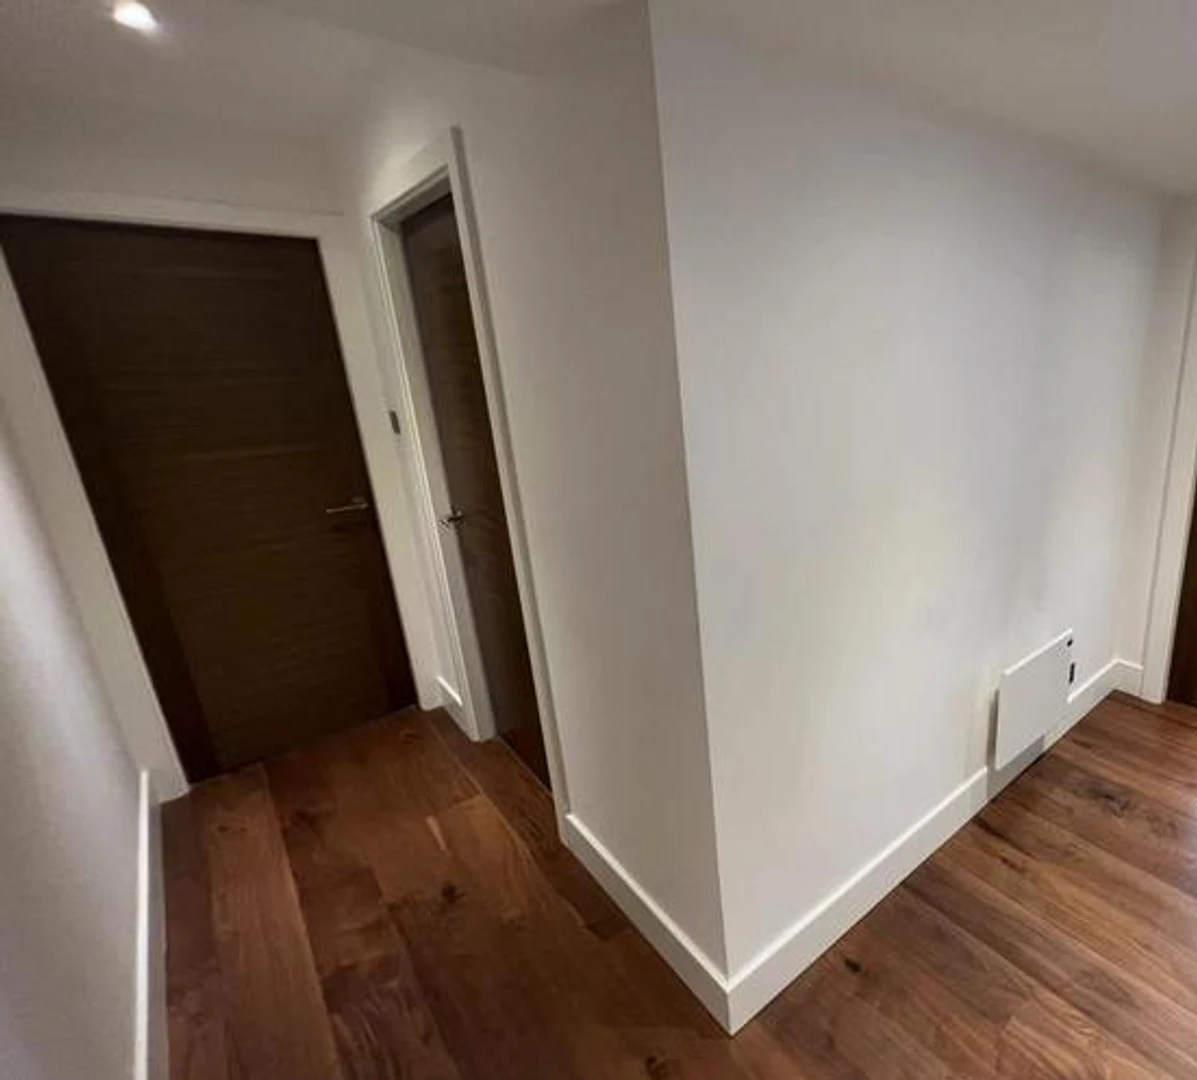 Room for rent in a shared flat in York